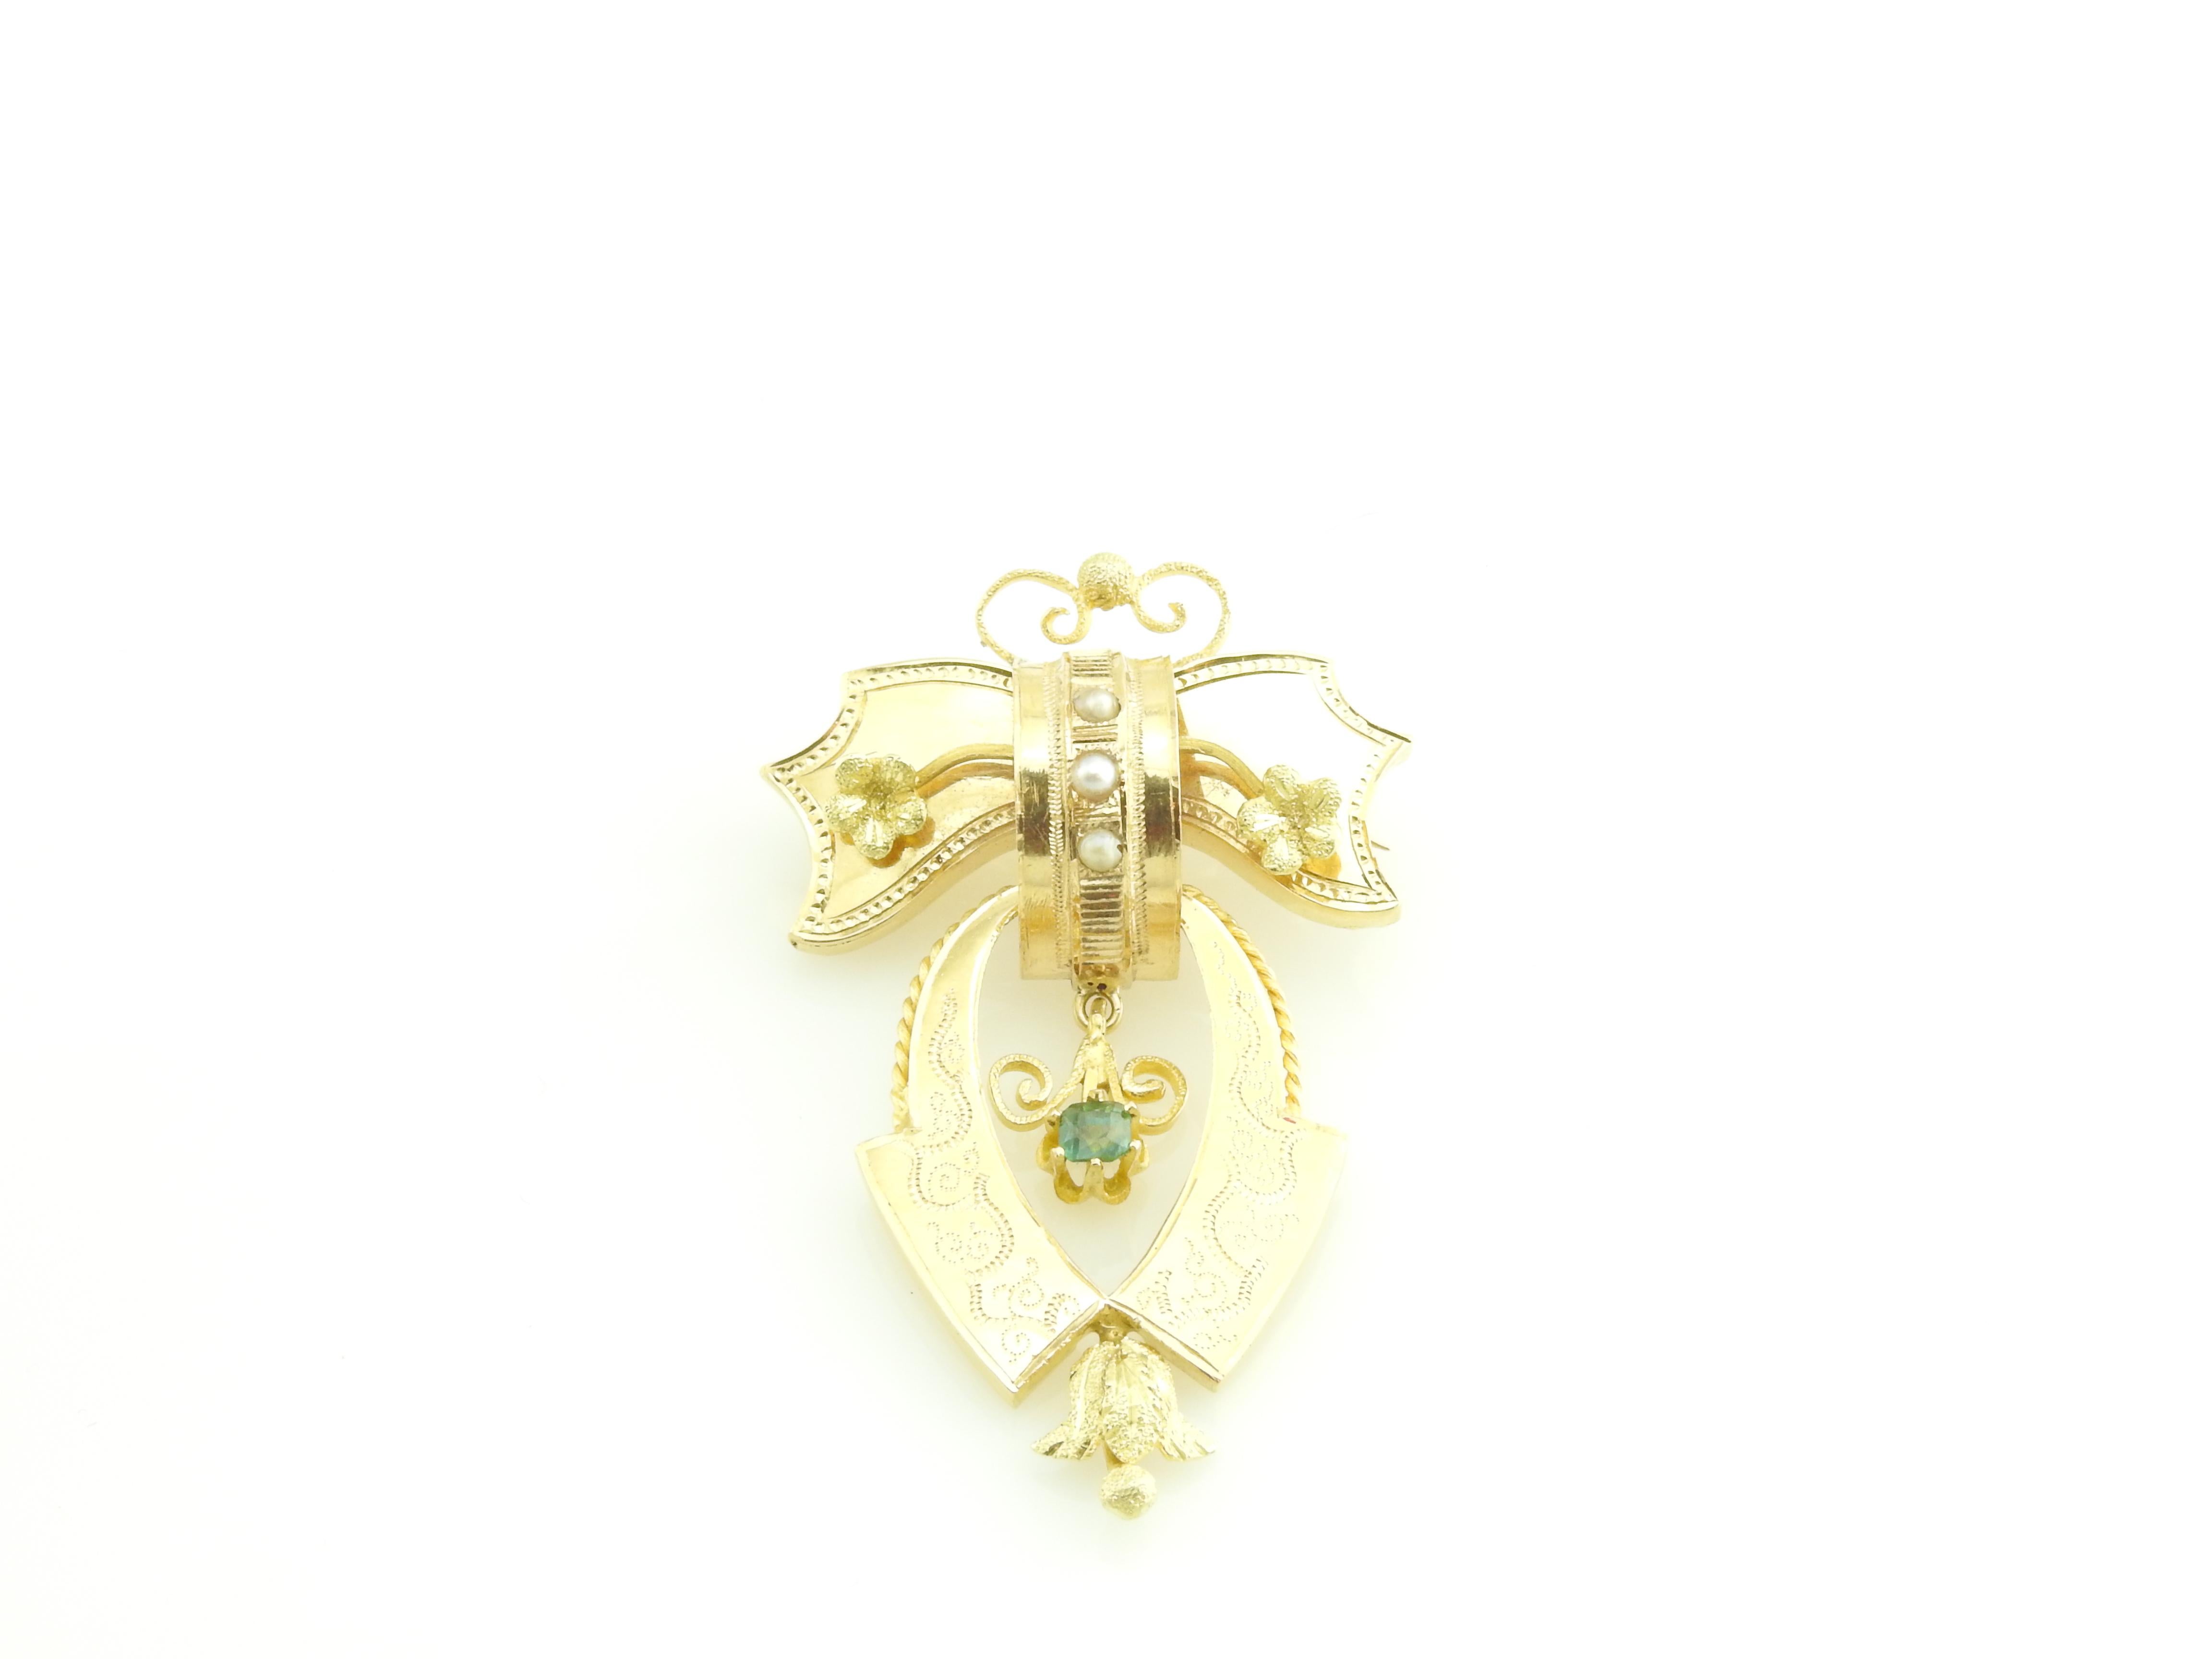 Antique Victorian 18 Karat Yellow Gold Brooch / Pin

This stunning bow brooch features three seed pearls and one blue topaz set in beautifully detailed 18K yellow gold.

Size: 48 mm x 30 mm

Weight: 4.7 dwt. / 7.4 gr.

Acid tested for 18K